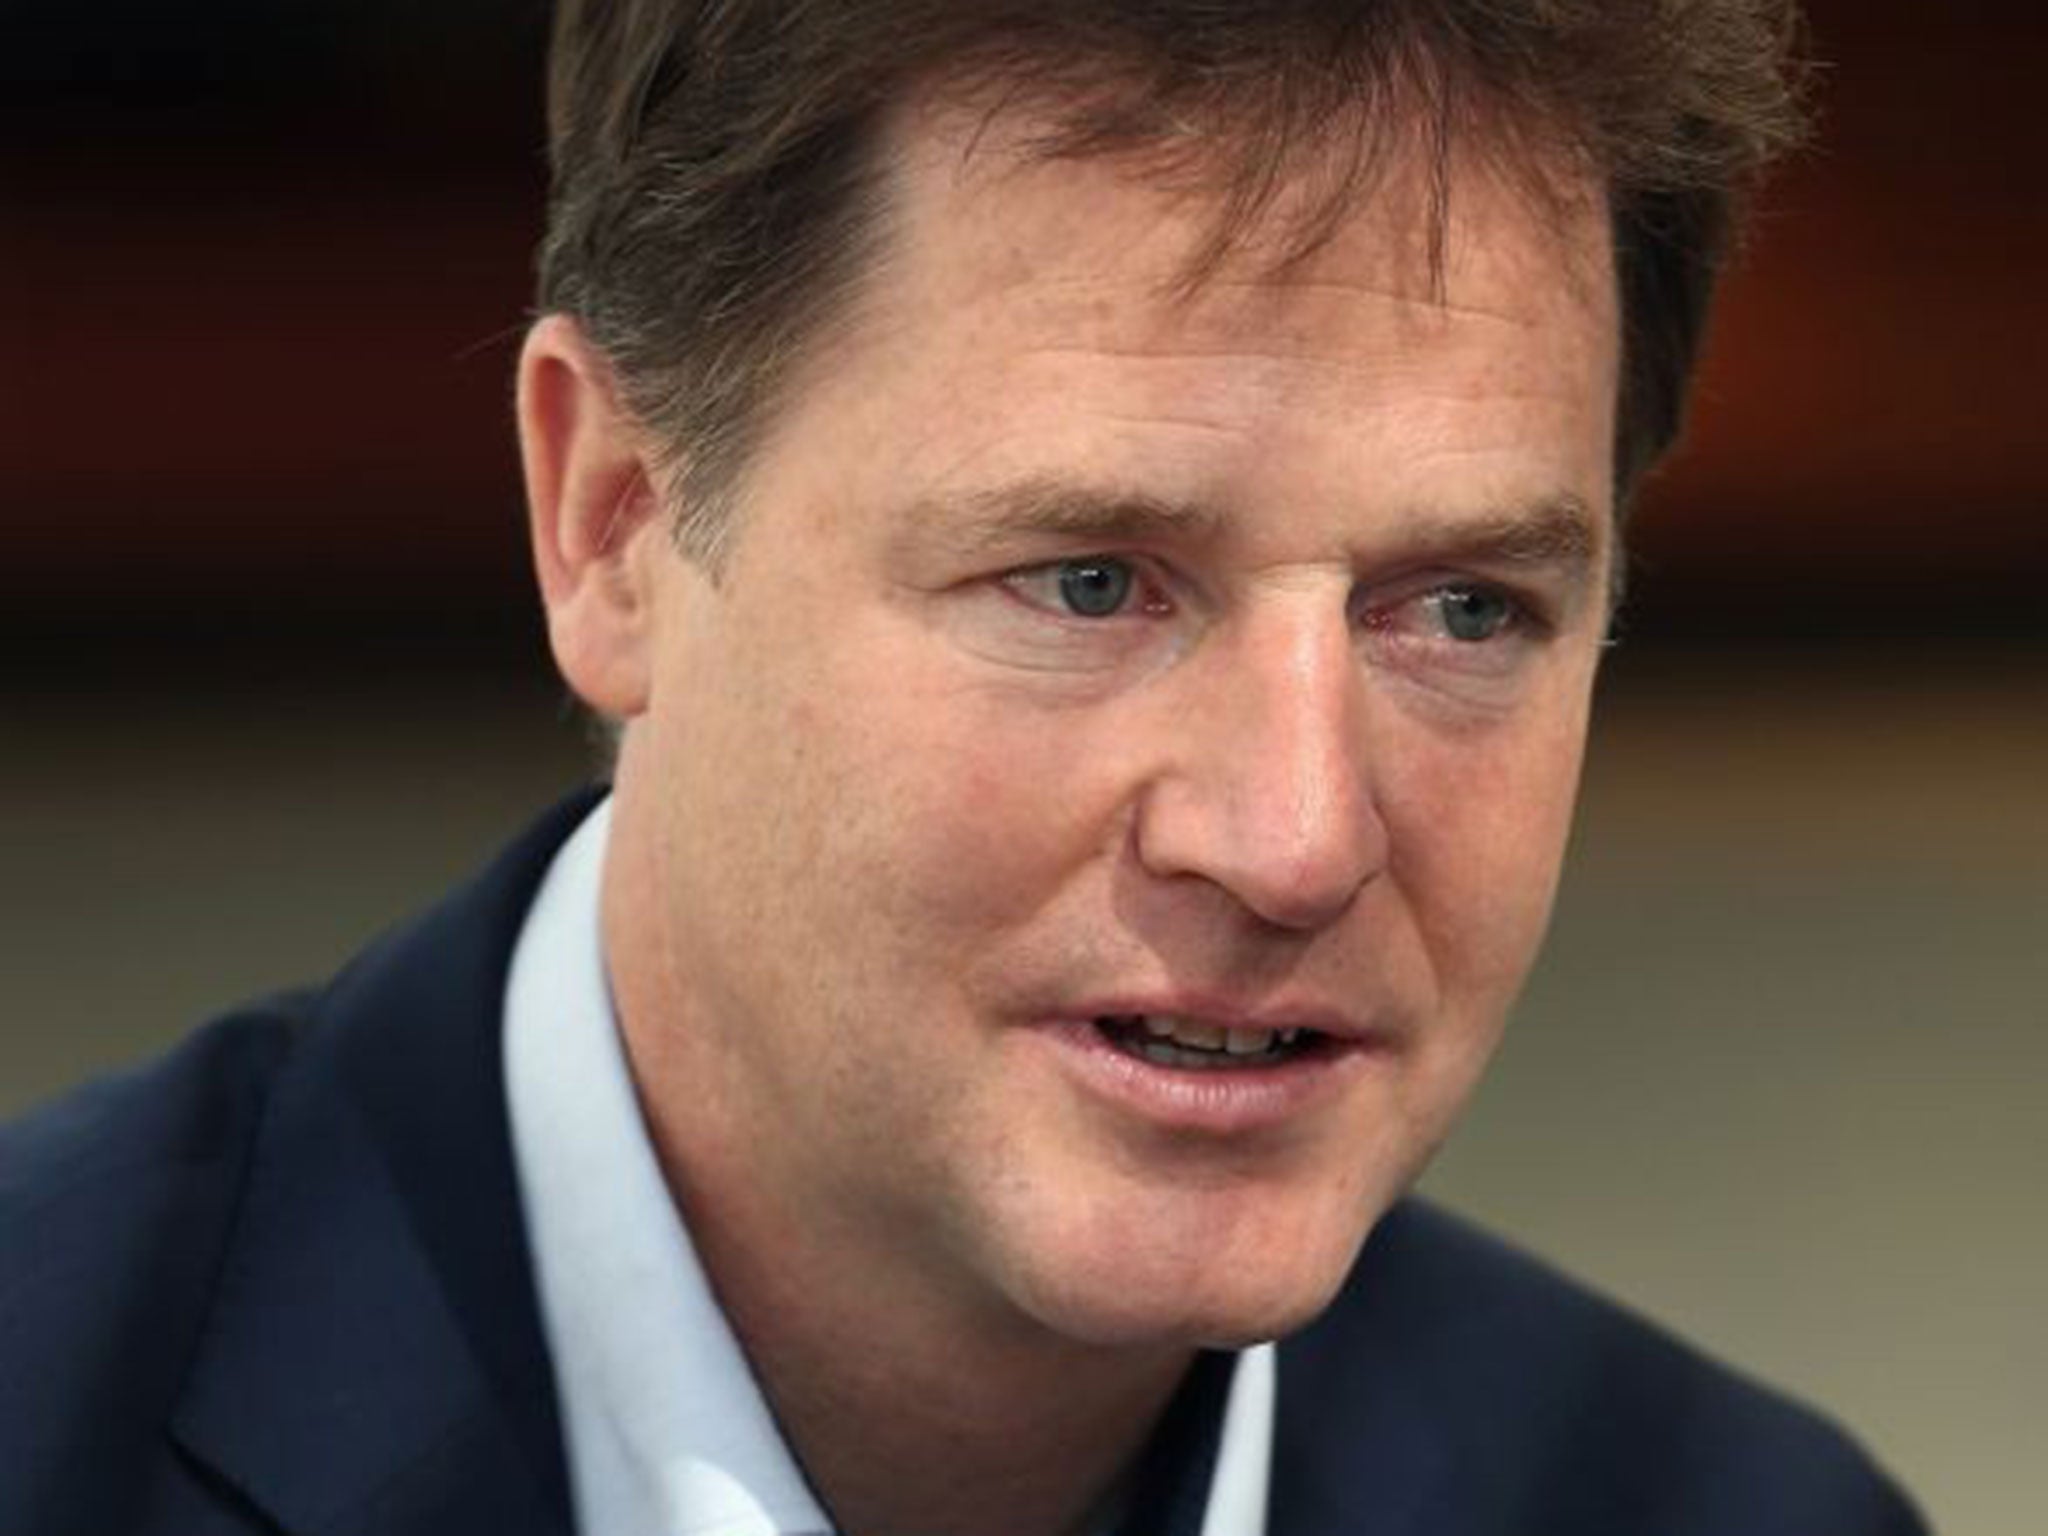 Does Clegg face problems from his own party?